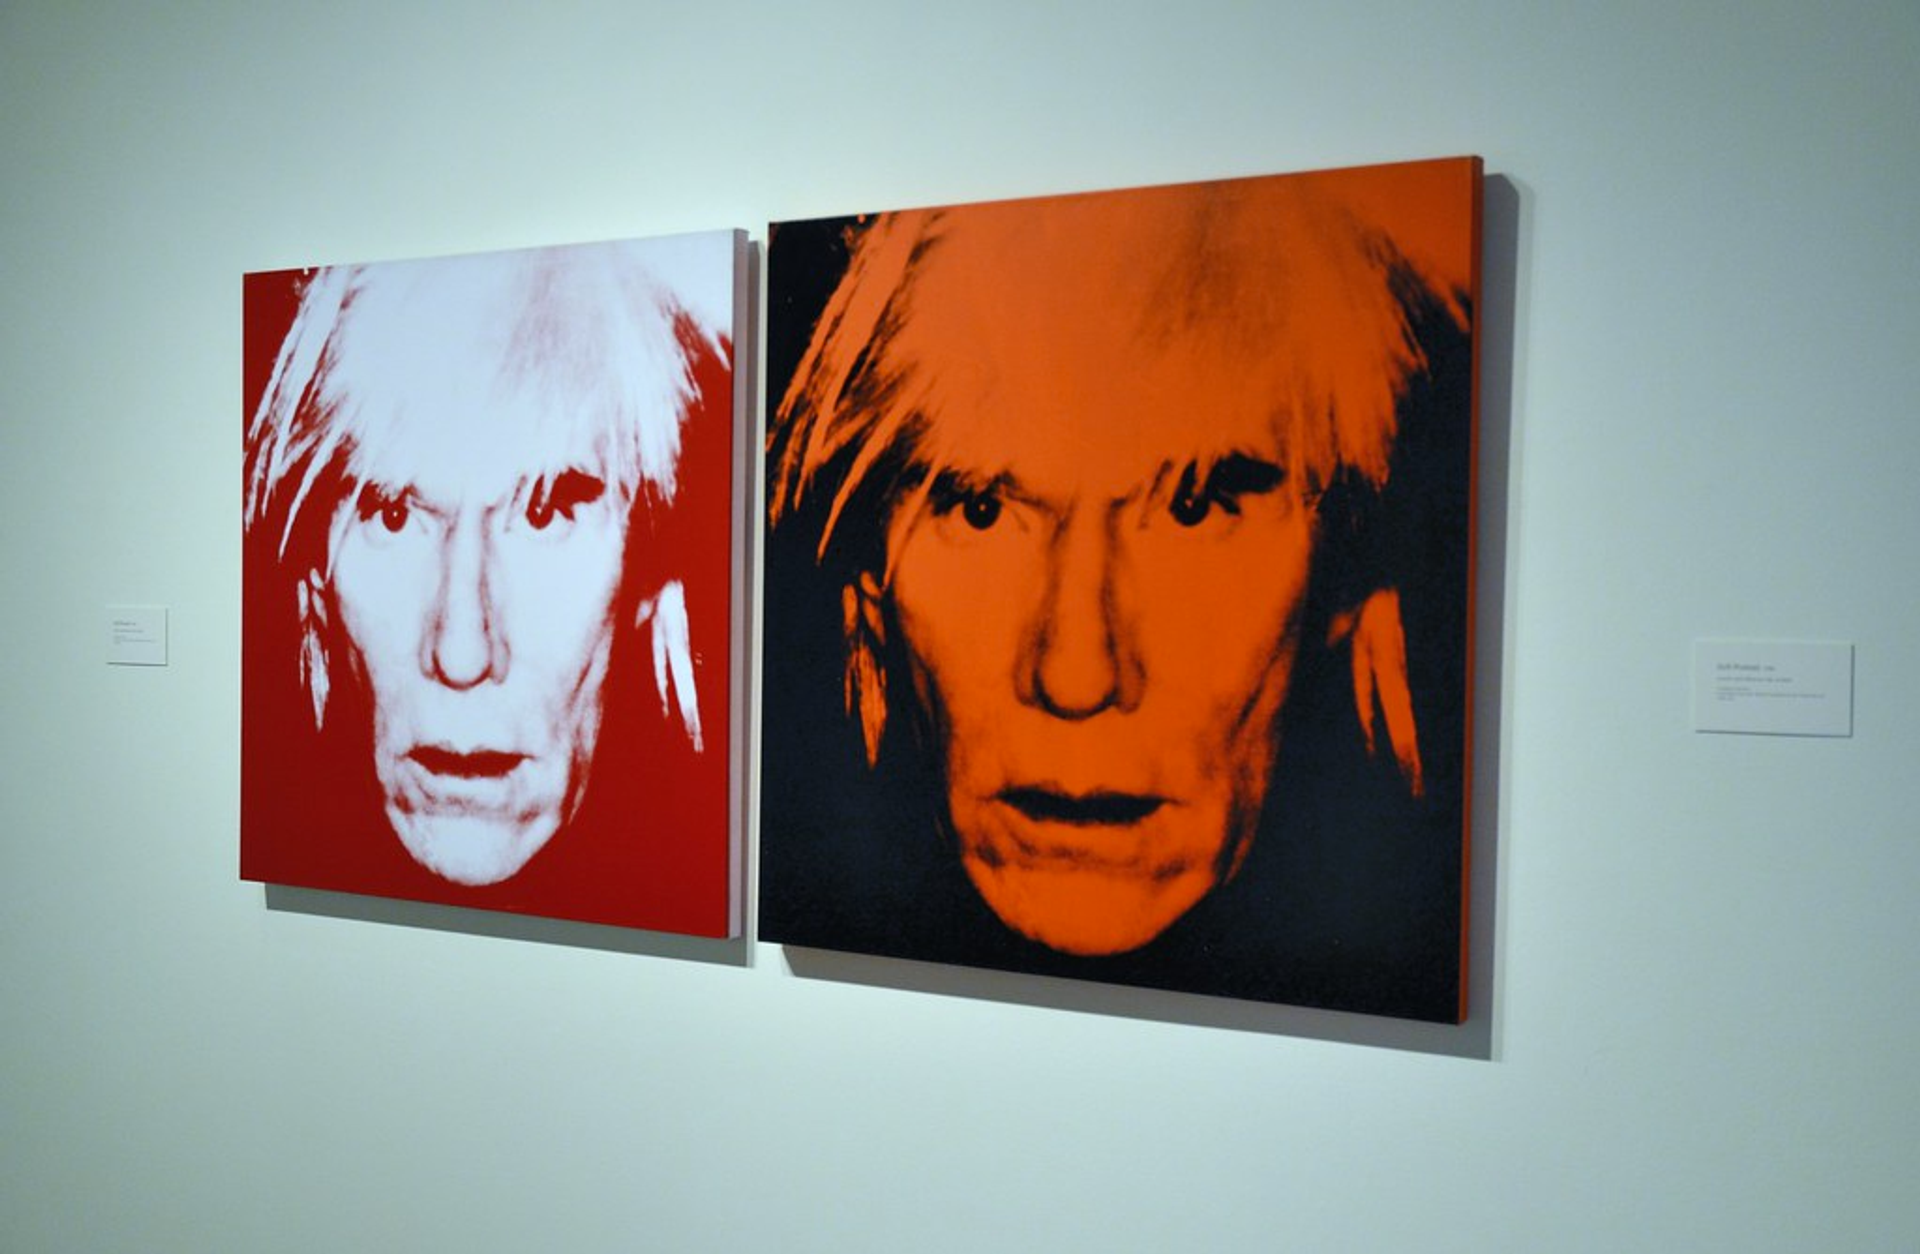 A diptych of portraits of Andy Warhol, close up to the camera. On the left, he is depicted in light blue and red; on the right, in orange and black. His lips are slightly parted and he is staring into the camera.